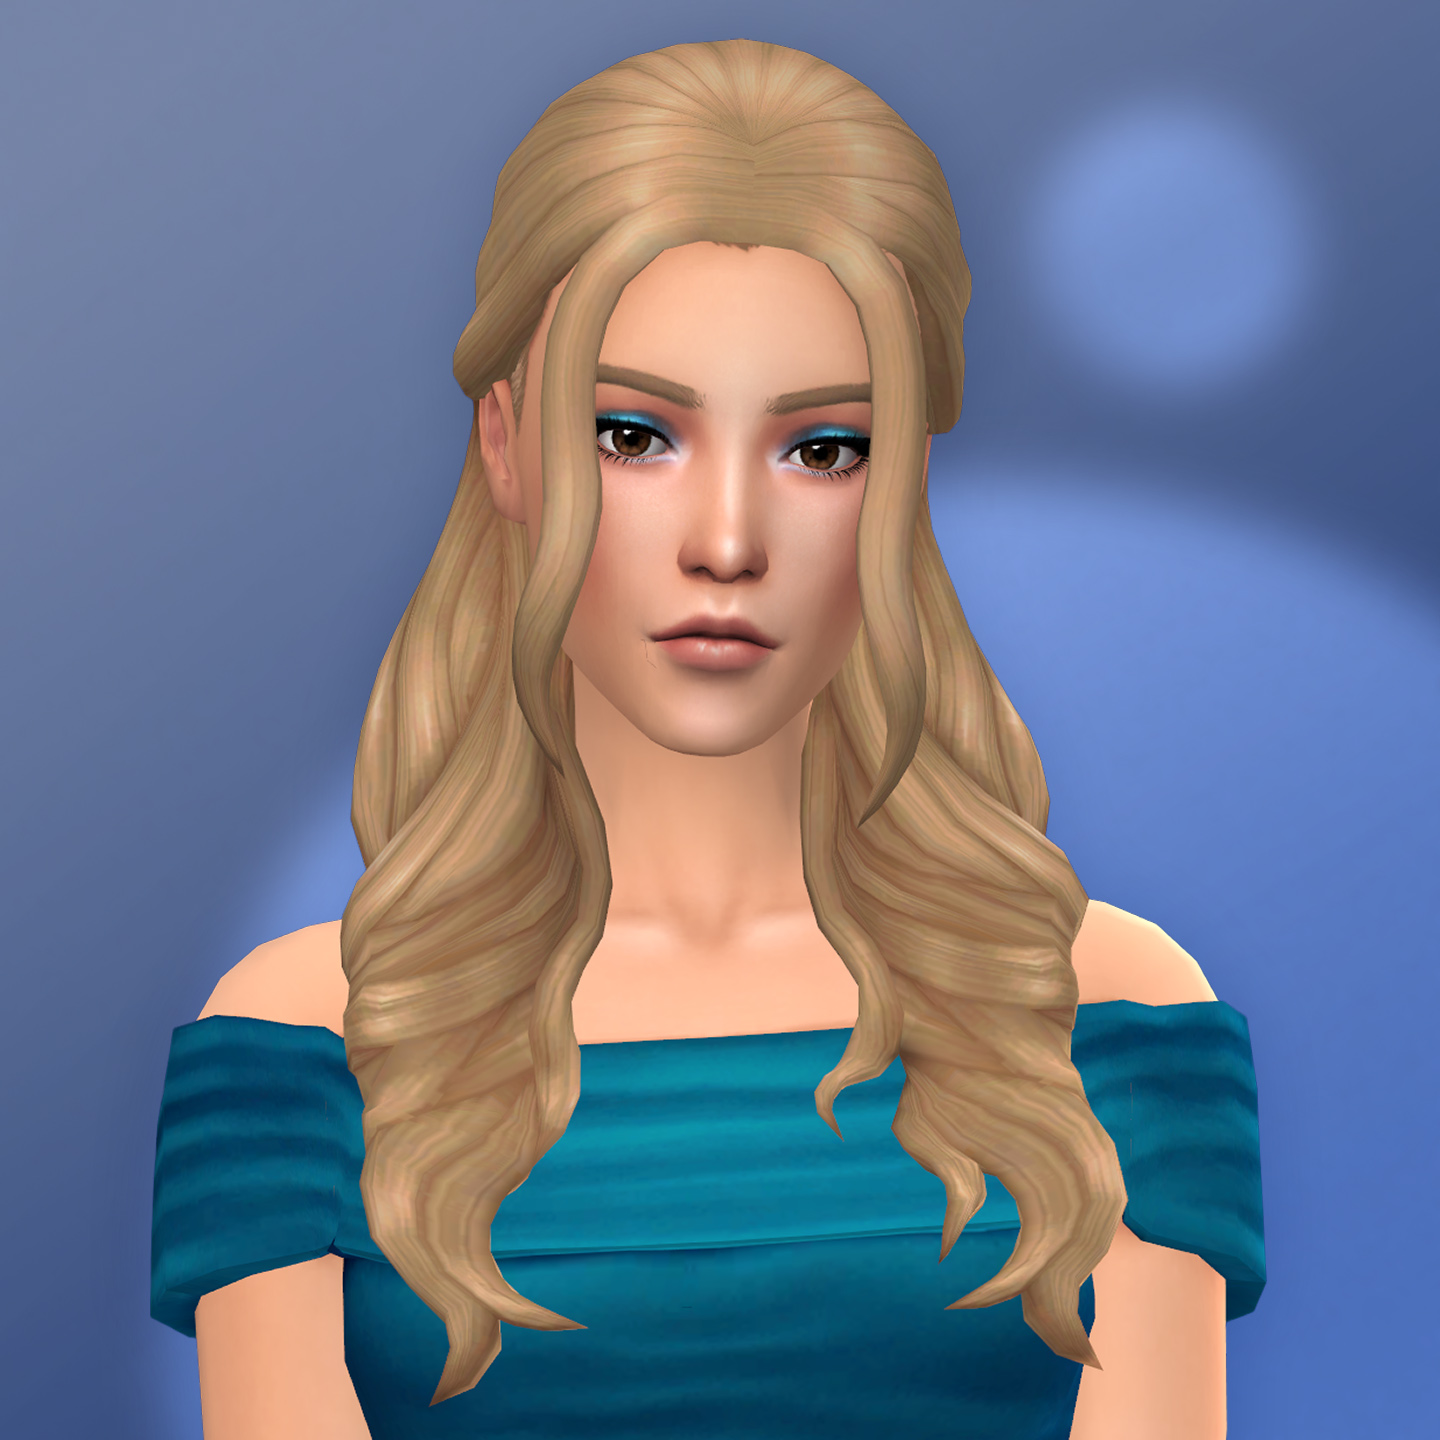 Download QICC - Belle Hair - The Sims 4 Mods - CurseForge